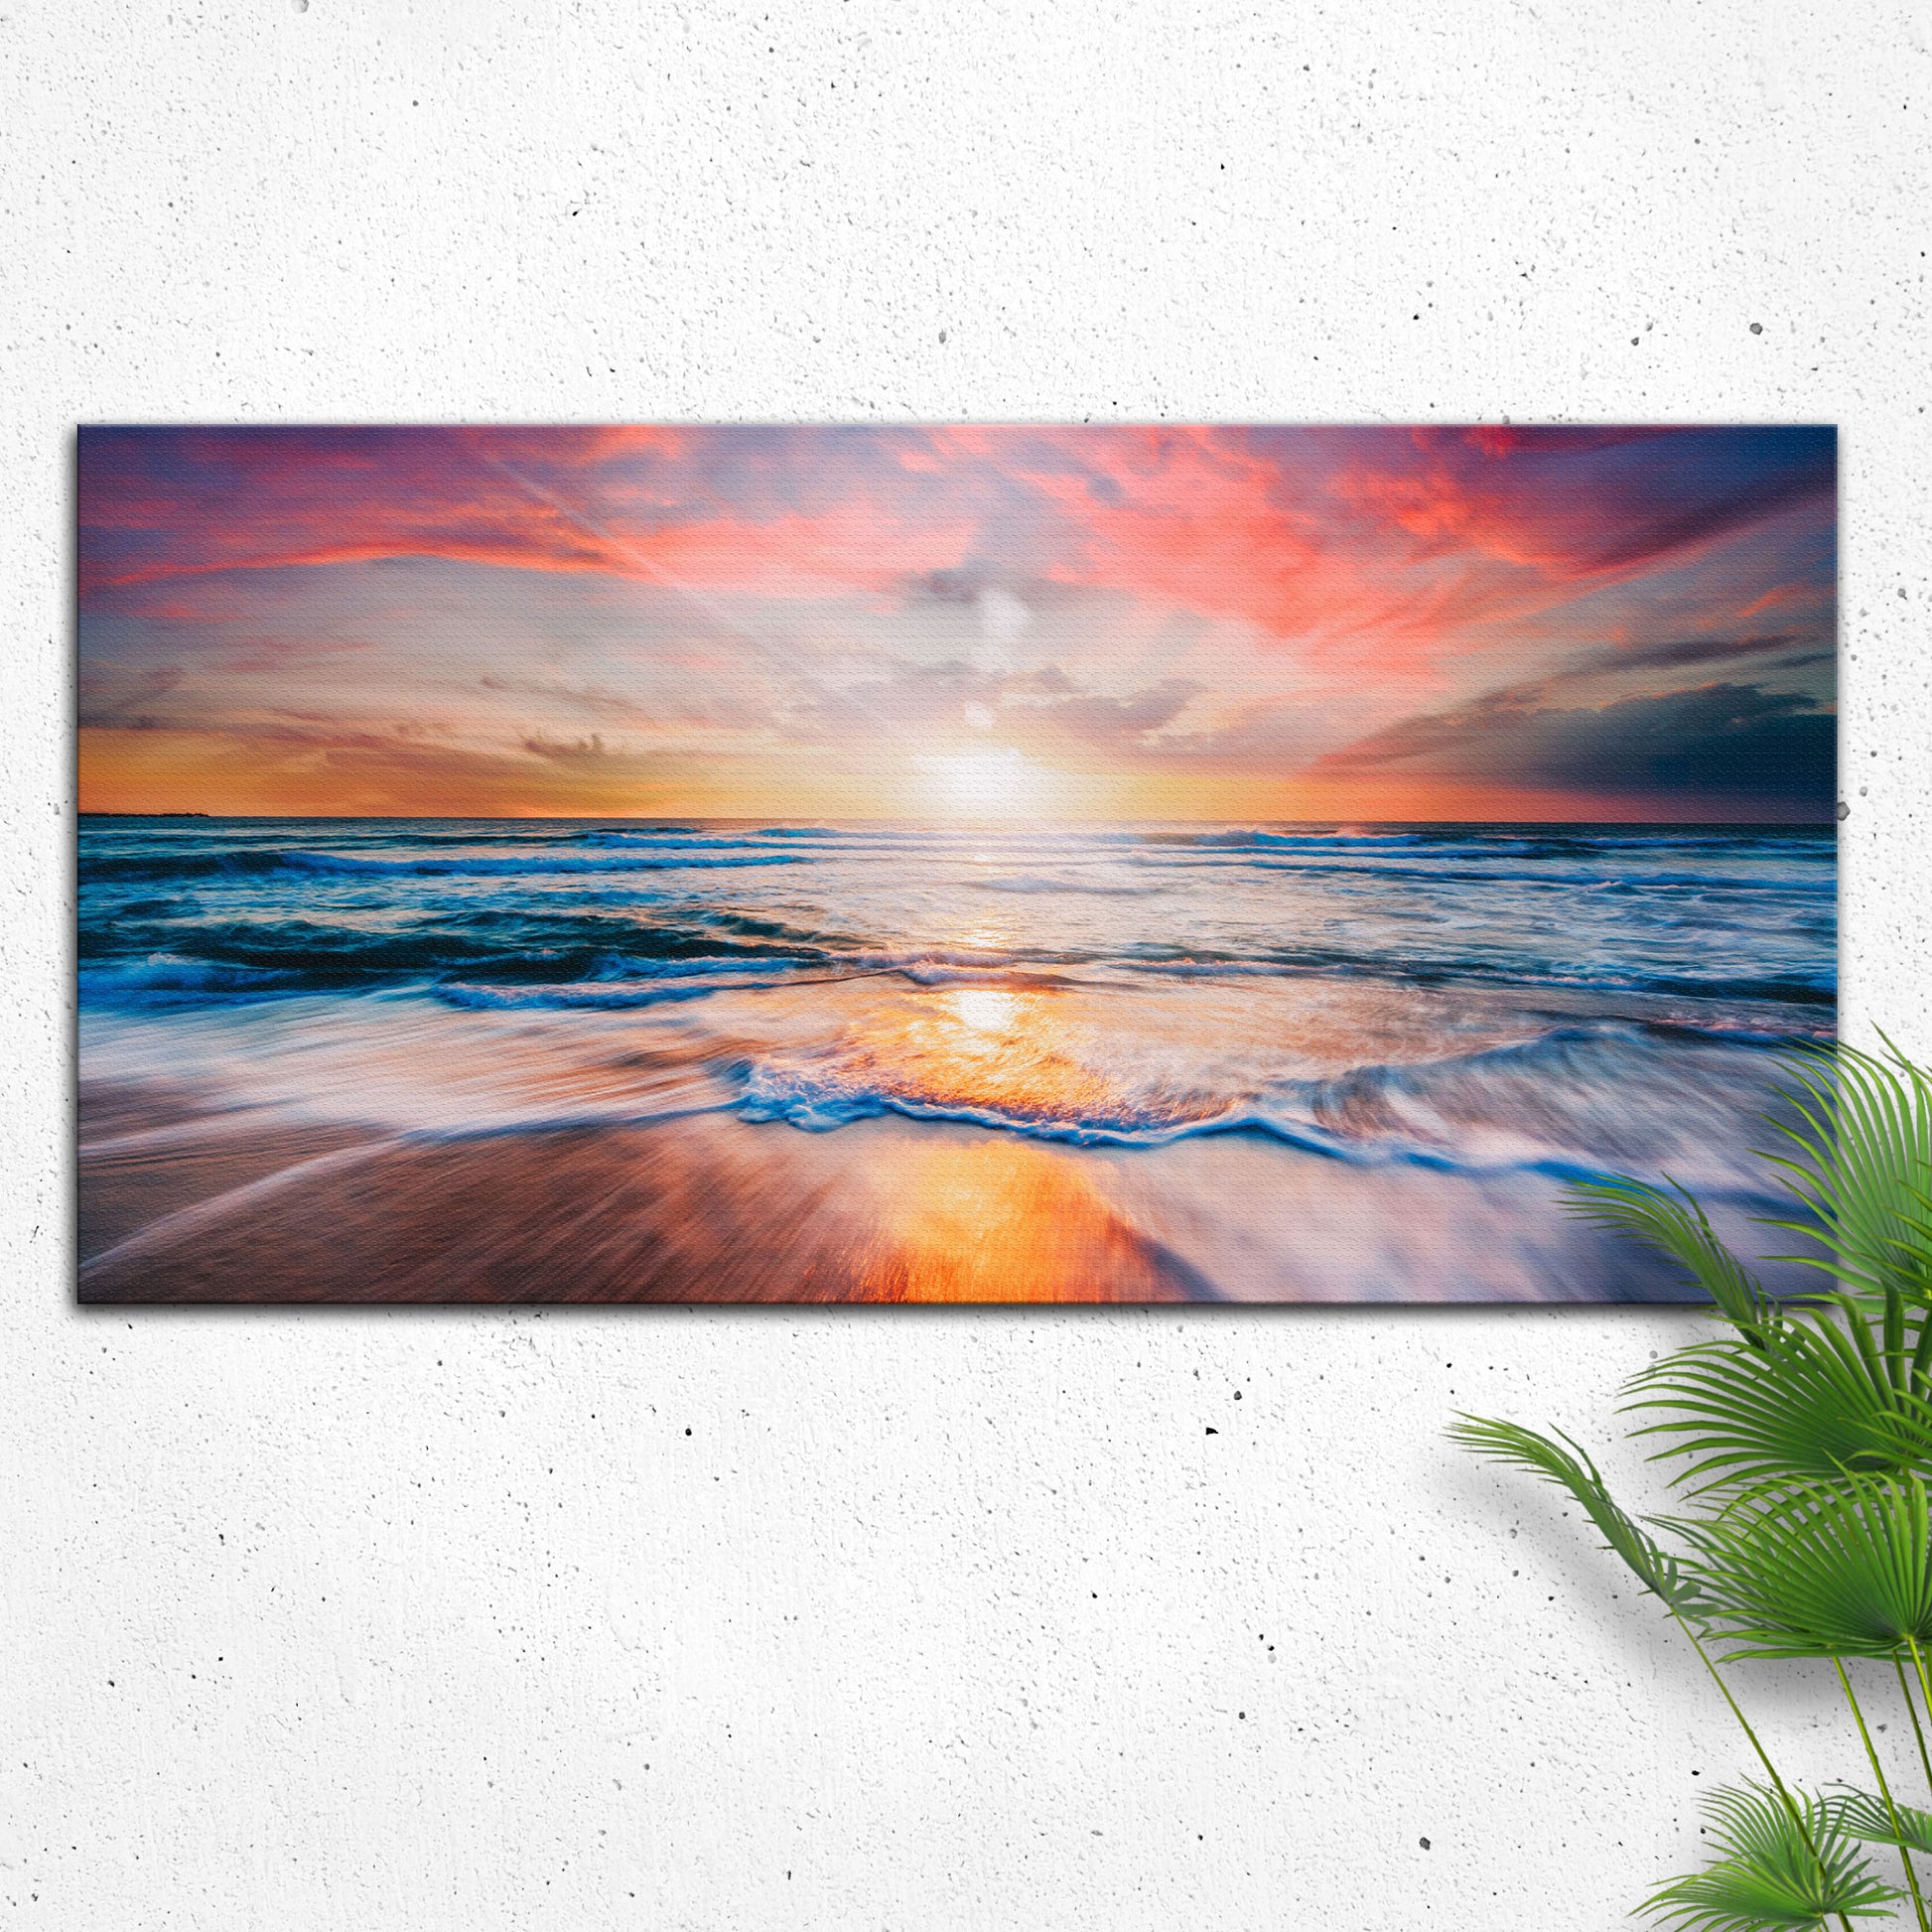 Sunrise Over The Horizon Canvas Wall Art - Image by Tailored Canvases